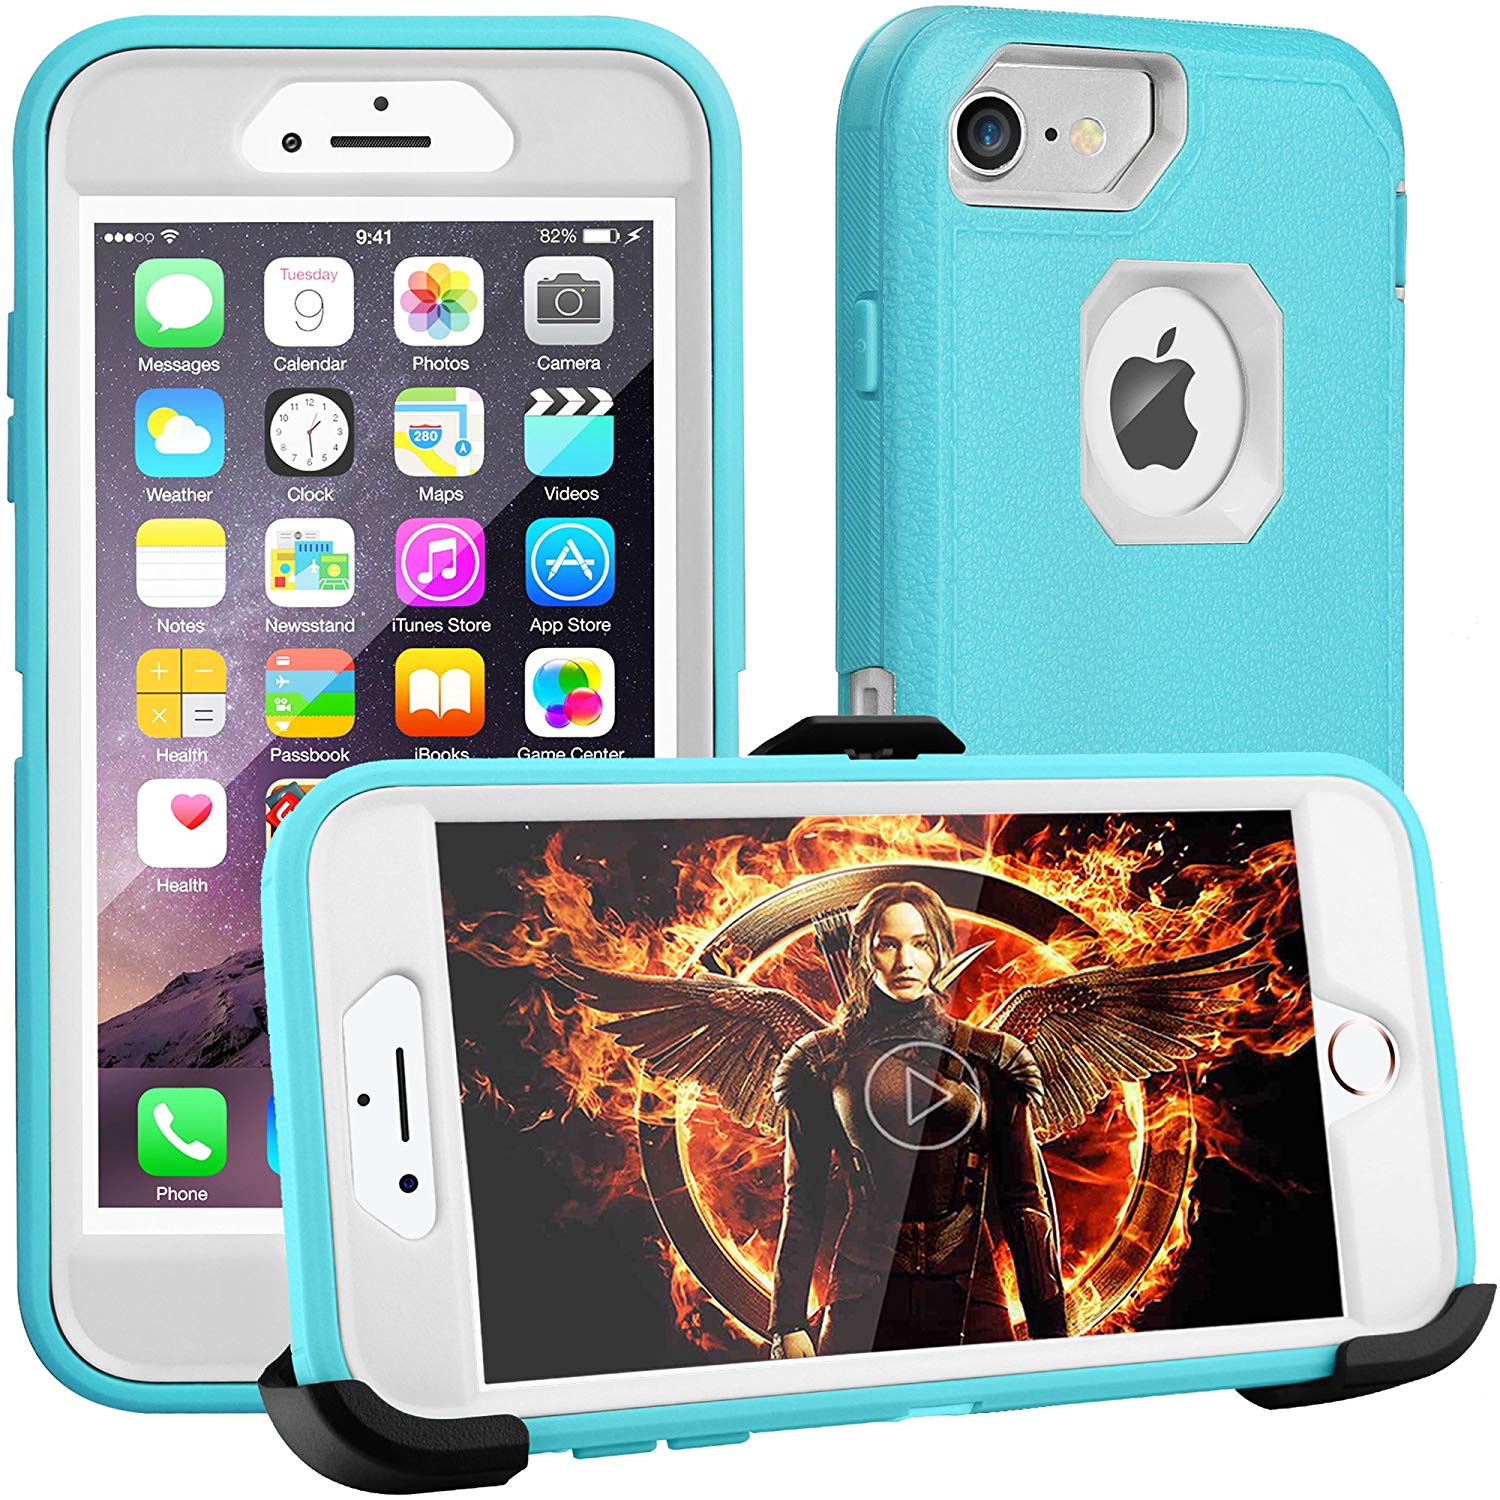 iPhone 8 case,iPhone 7 Case, iPhone 6s Case, FOGEEK [Dust-Proof] Belt-Clip Heavy Duty Kickstand Cover [Shockproof] Rugged Armor PC+TPU Shell for Apple iPhone 7 and iPhone 6/6s (Light Blue and White) …